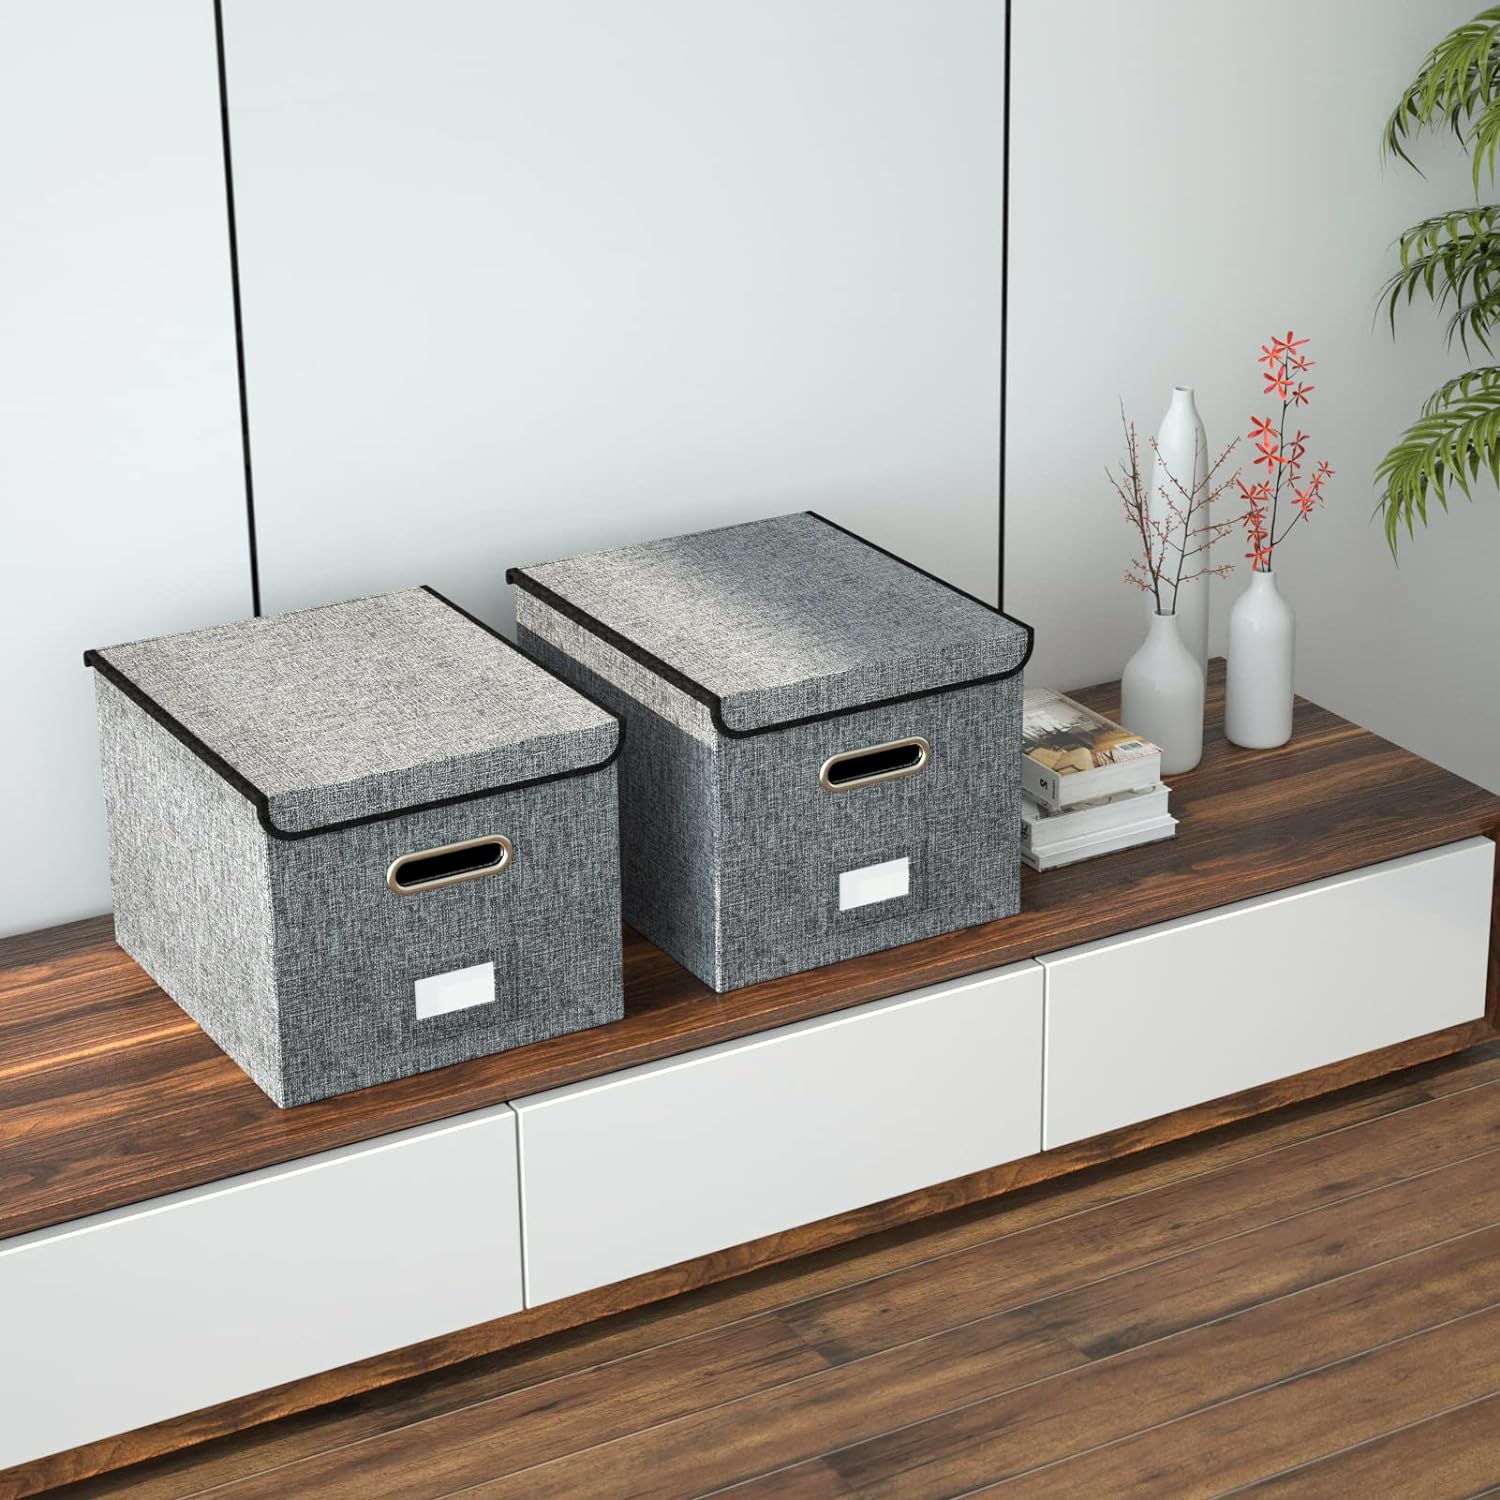 2 Packs File Organizer Box with lid with 5 file folders